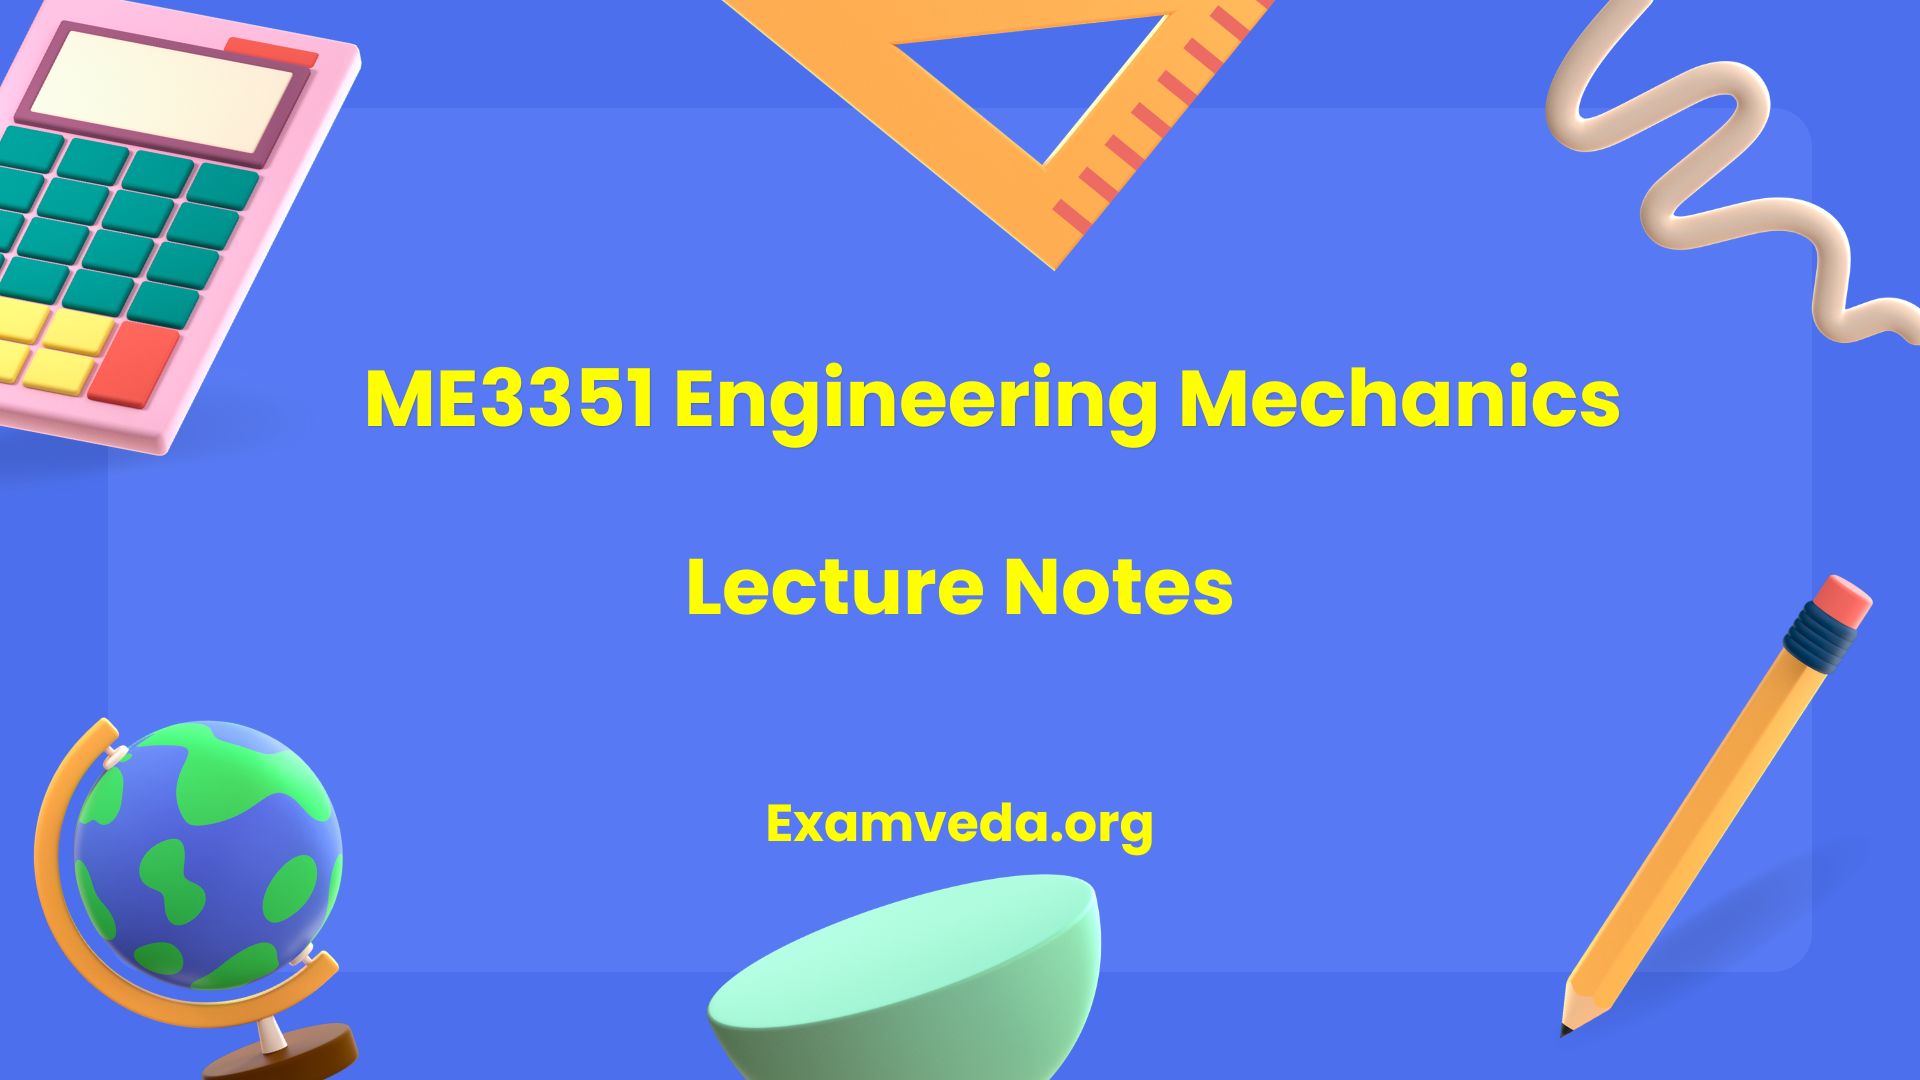 ME3351 Engineering Mechanics Lecture Notes